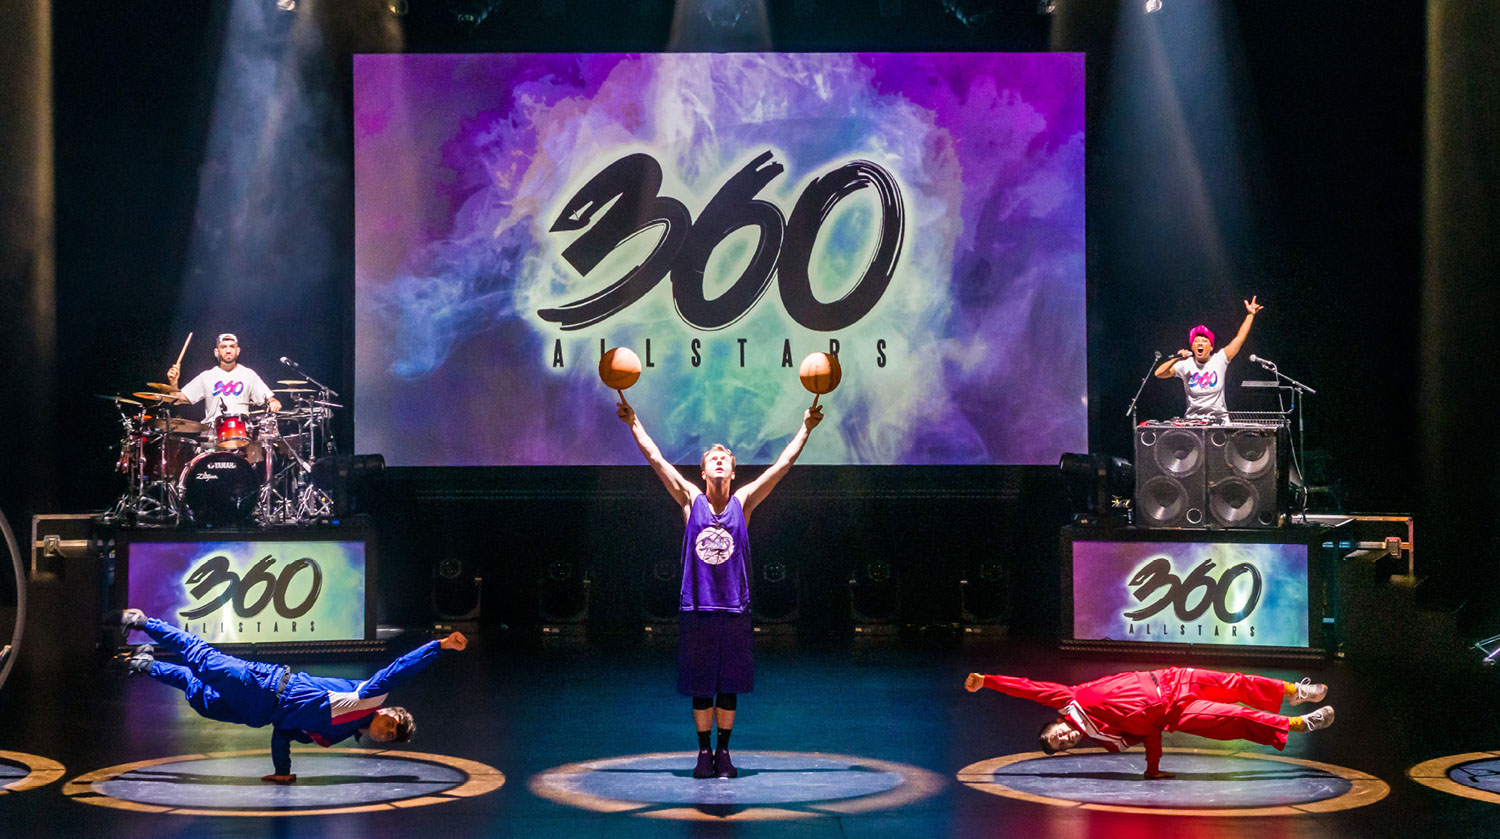 Image of the 360 All Stars perfoming with their logo projected on a screen centre stage. To the left, a man plays the drums atop a platform that reads "360 All Stars" in green, purple and blue. He wears a white shirt with a backwards baseball cap. Standing opposite him on another platform, a woman plays music from a sound system with two large speakers. She speaks into the microphone, and raises her left arm in the air. To the left, a man wearing blue ensemble balances his body on one arm, which is propelled sideways in the air. The man opposite him performs the same stunt, but wears a red suit. In the centre of the image, a man in a purple tank top spins two basketballs on his index fingers. The performs are all illuminated on stage by a colourful spotlight.